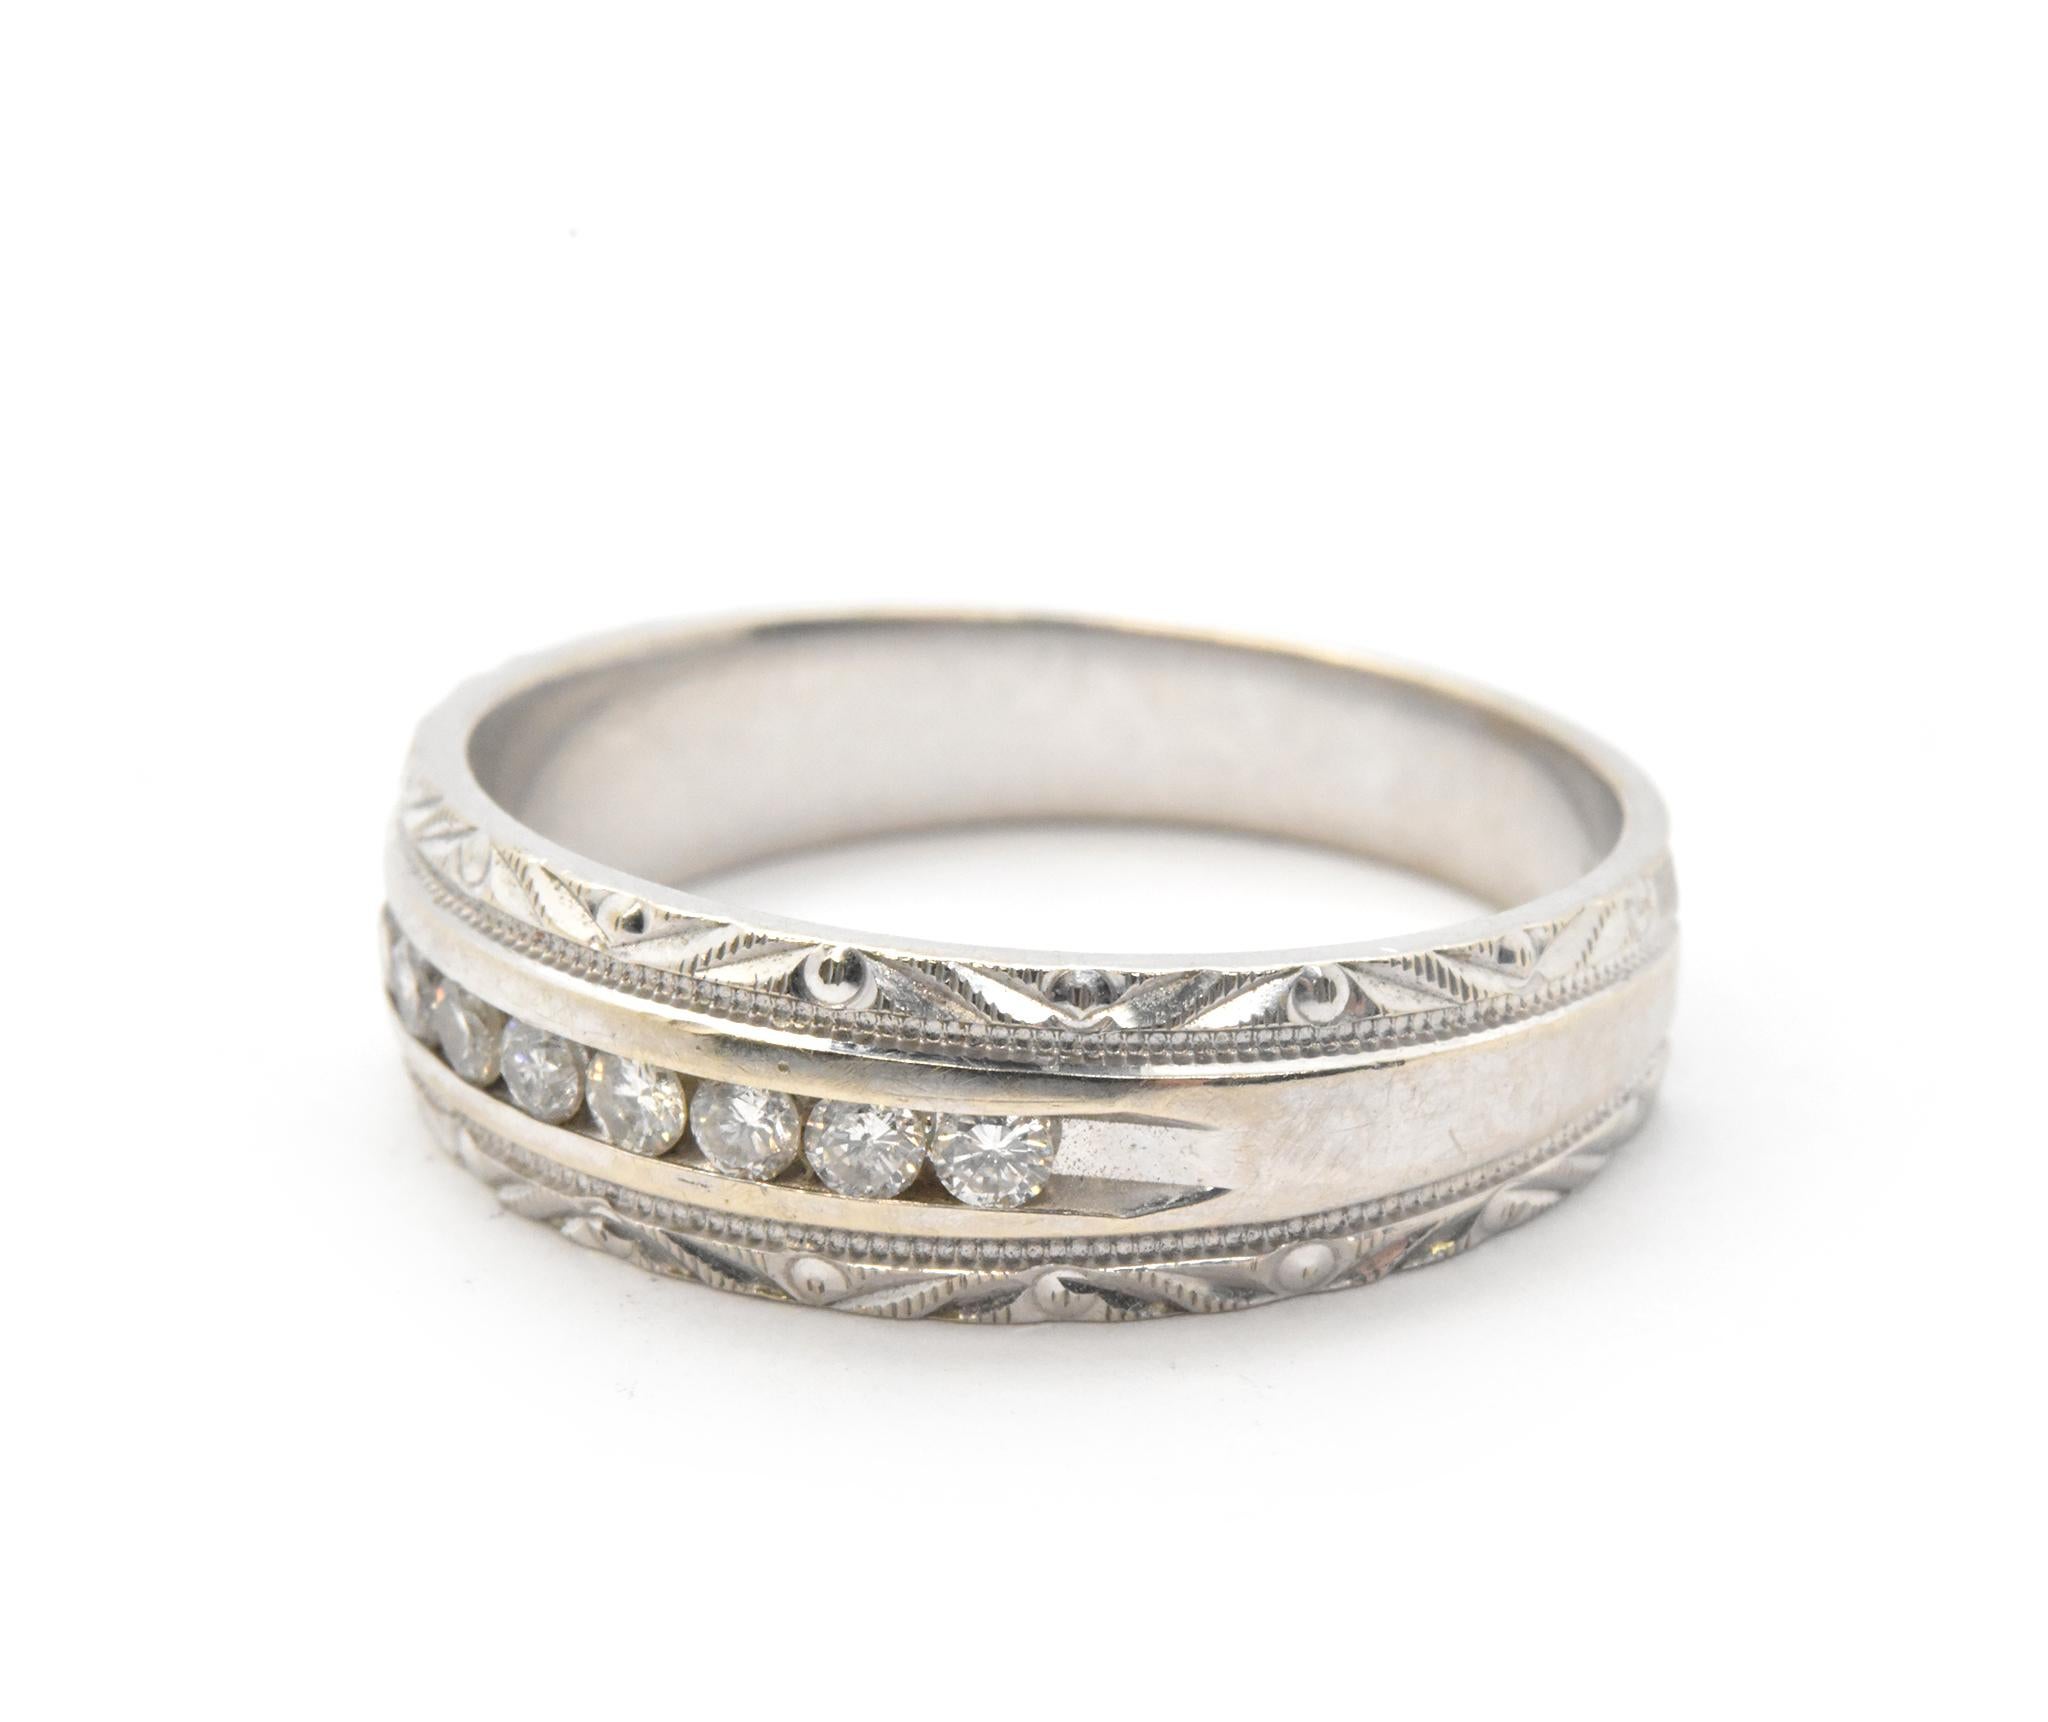 This men’s wedding band is crafted in 10 karat white gold and set with 8 round diamond melee equaling 0.24tw with H-I color and SI clarity. This band is 6.5mm wide with the diamonds channel set down the center and engraved accented edges in finger